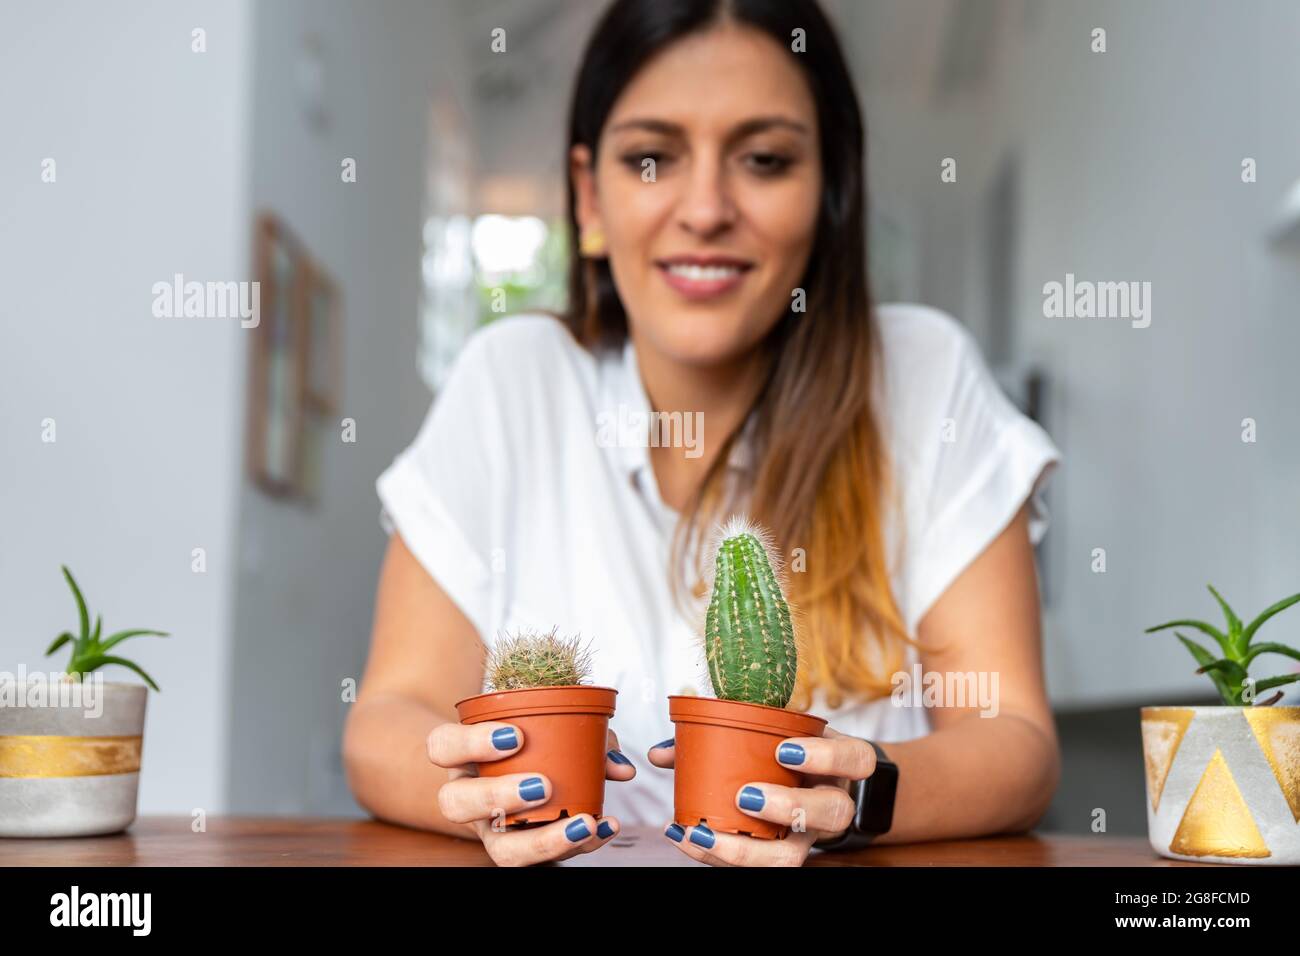 selective focus of succulents with an out-of-focus woman in the background Stock Photo